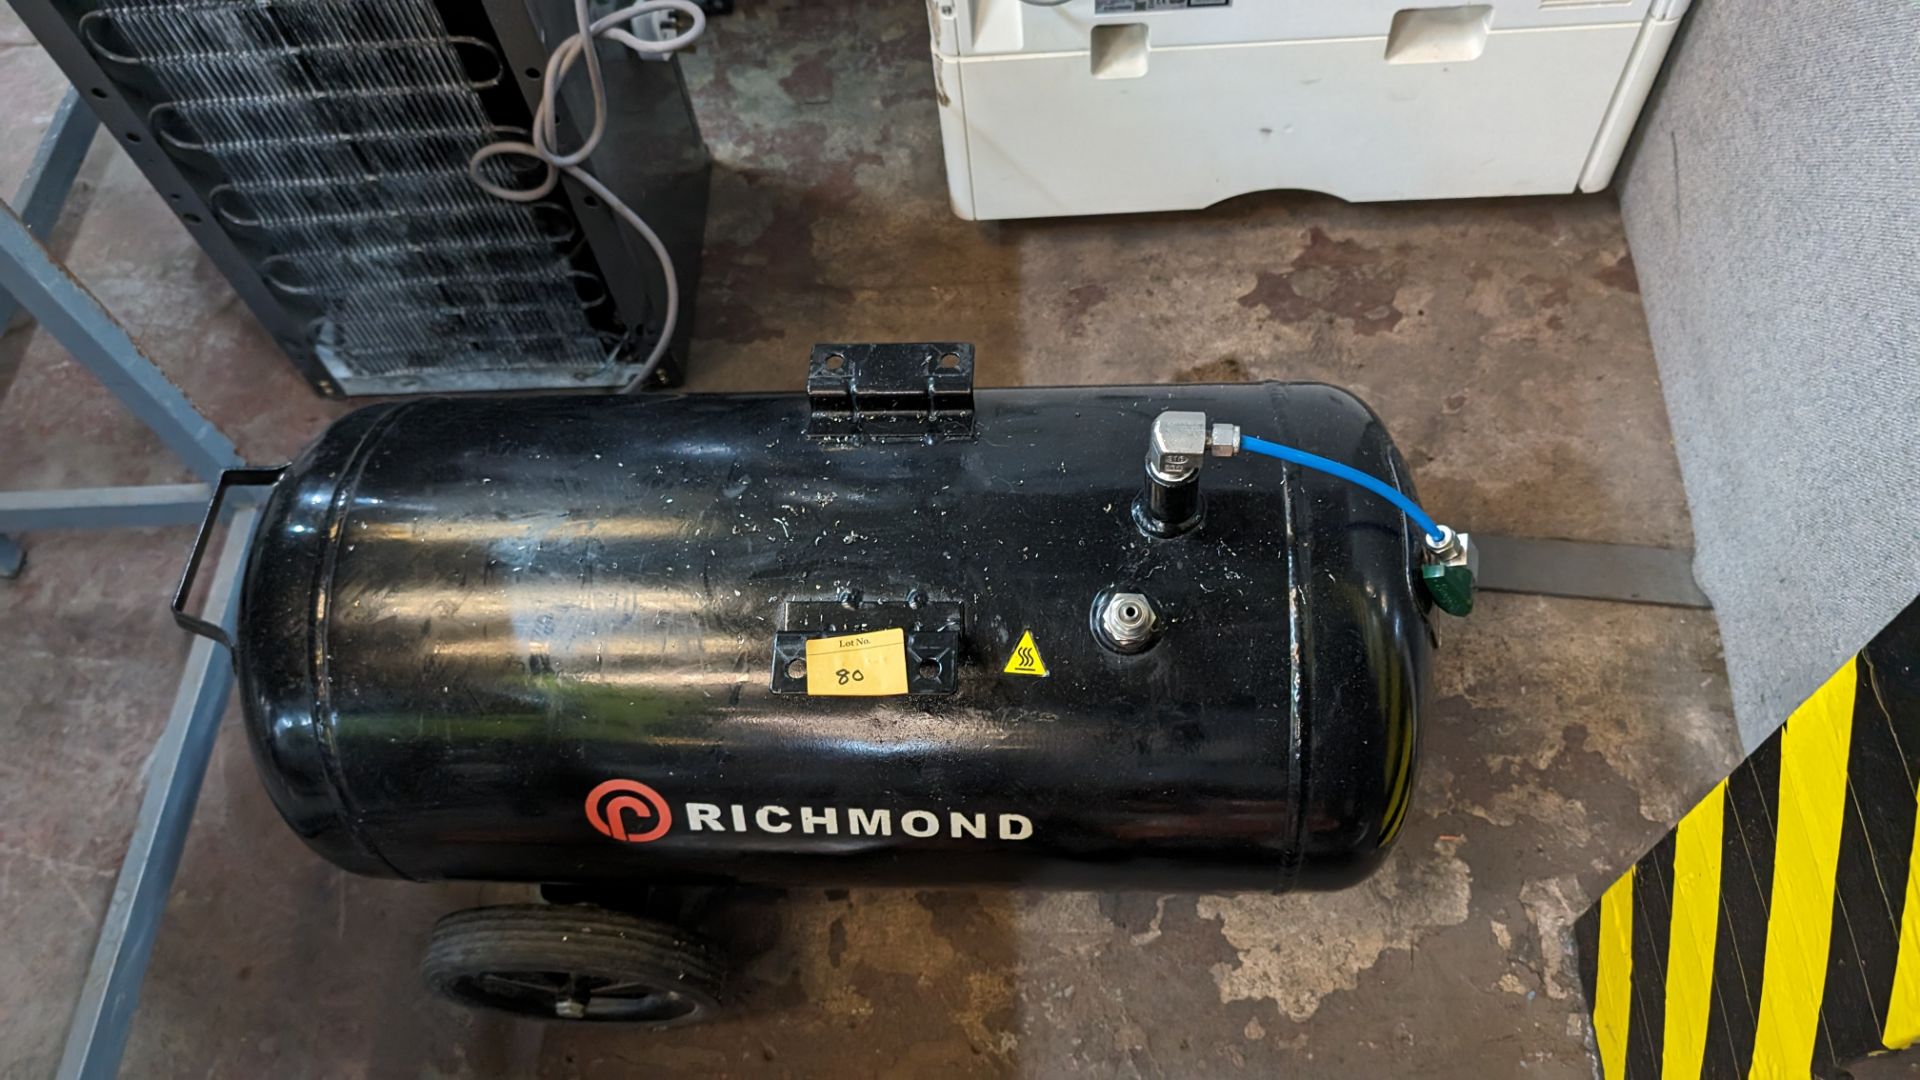 Richmond mobile welded air receiver - Image 4 of 6